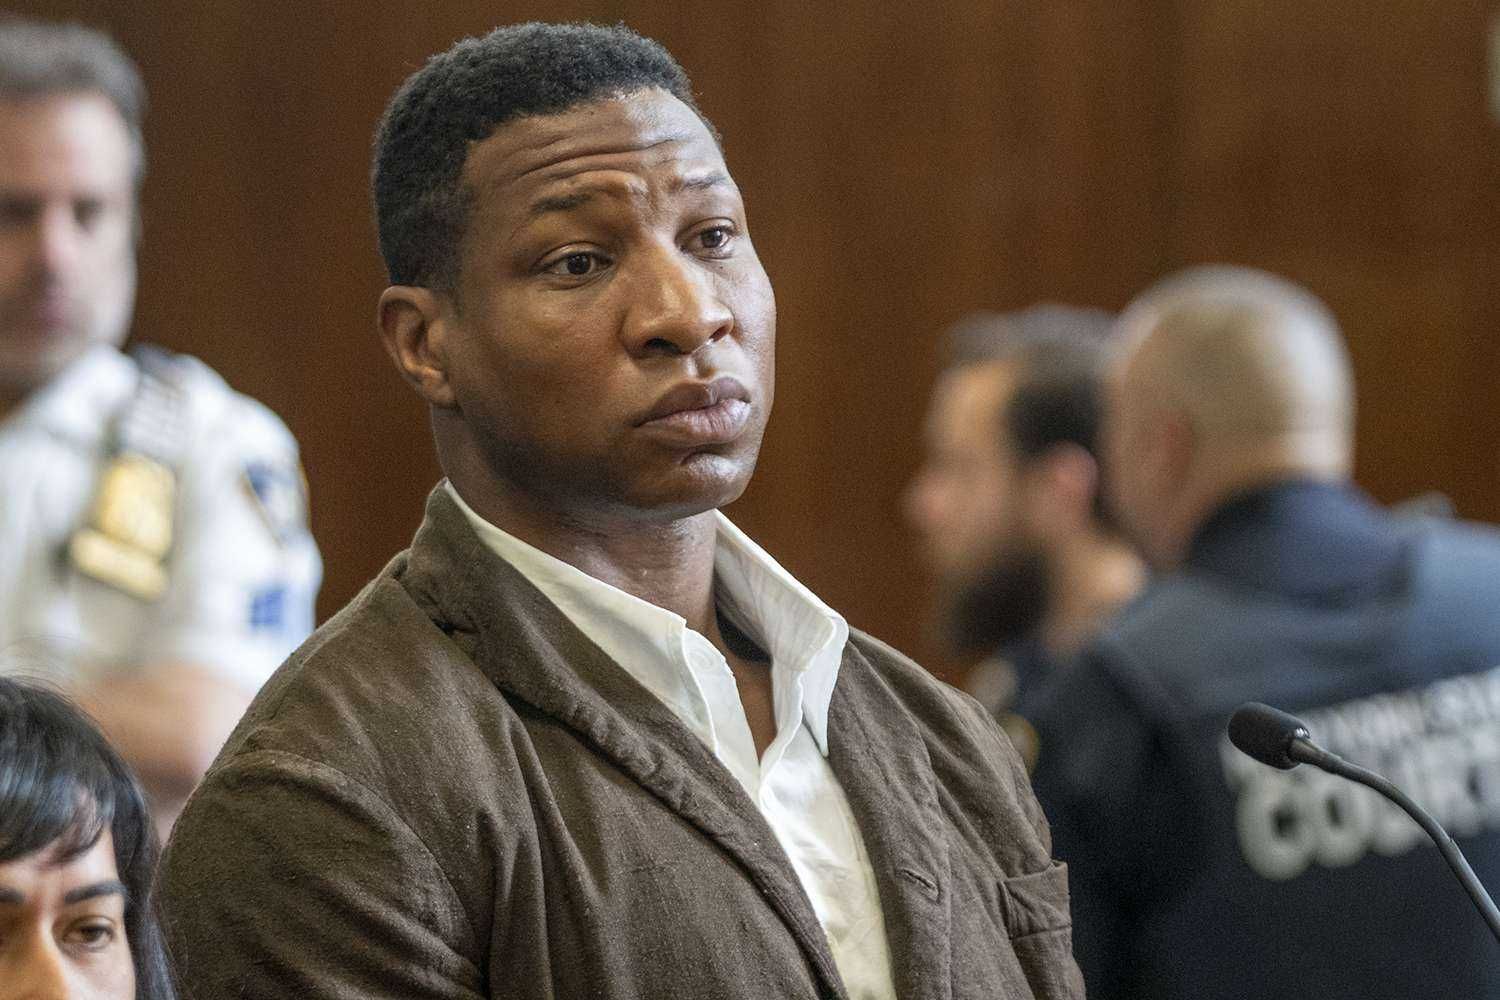 Two Ex Girlfriends Accuse Jonathan Majors Of Abuse Following Guilty